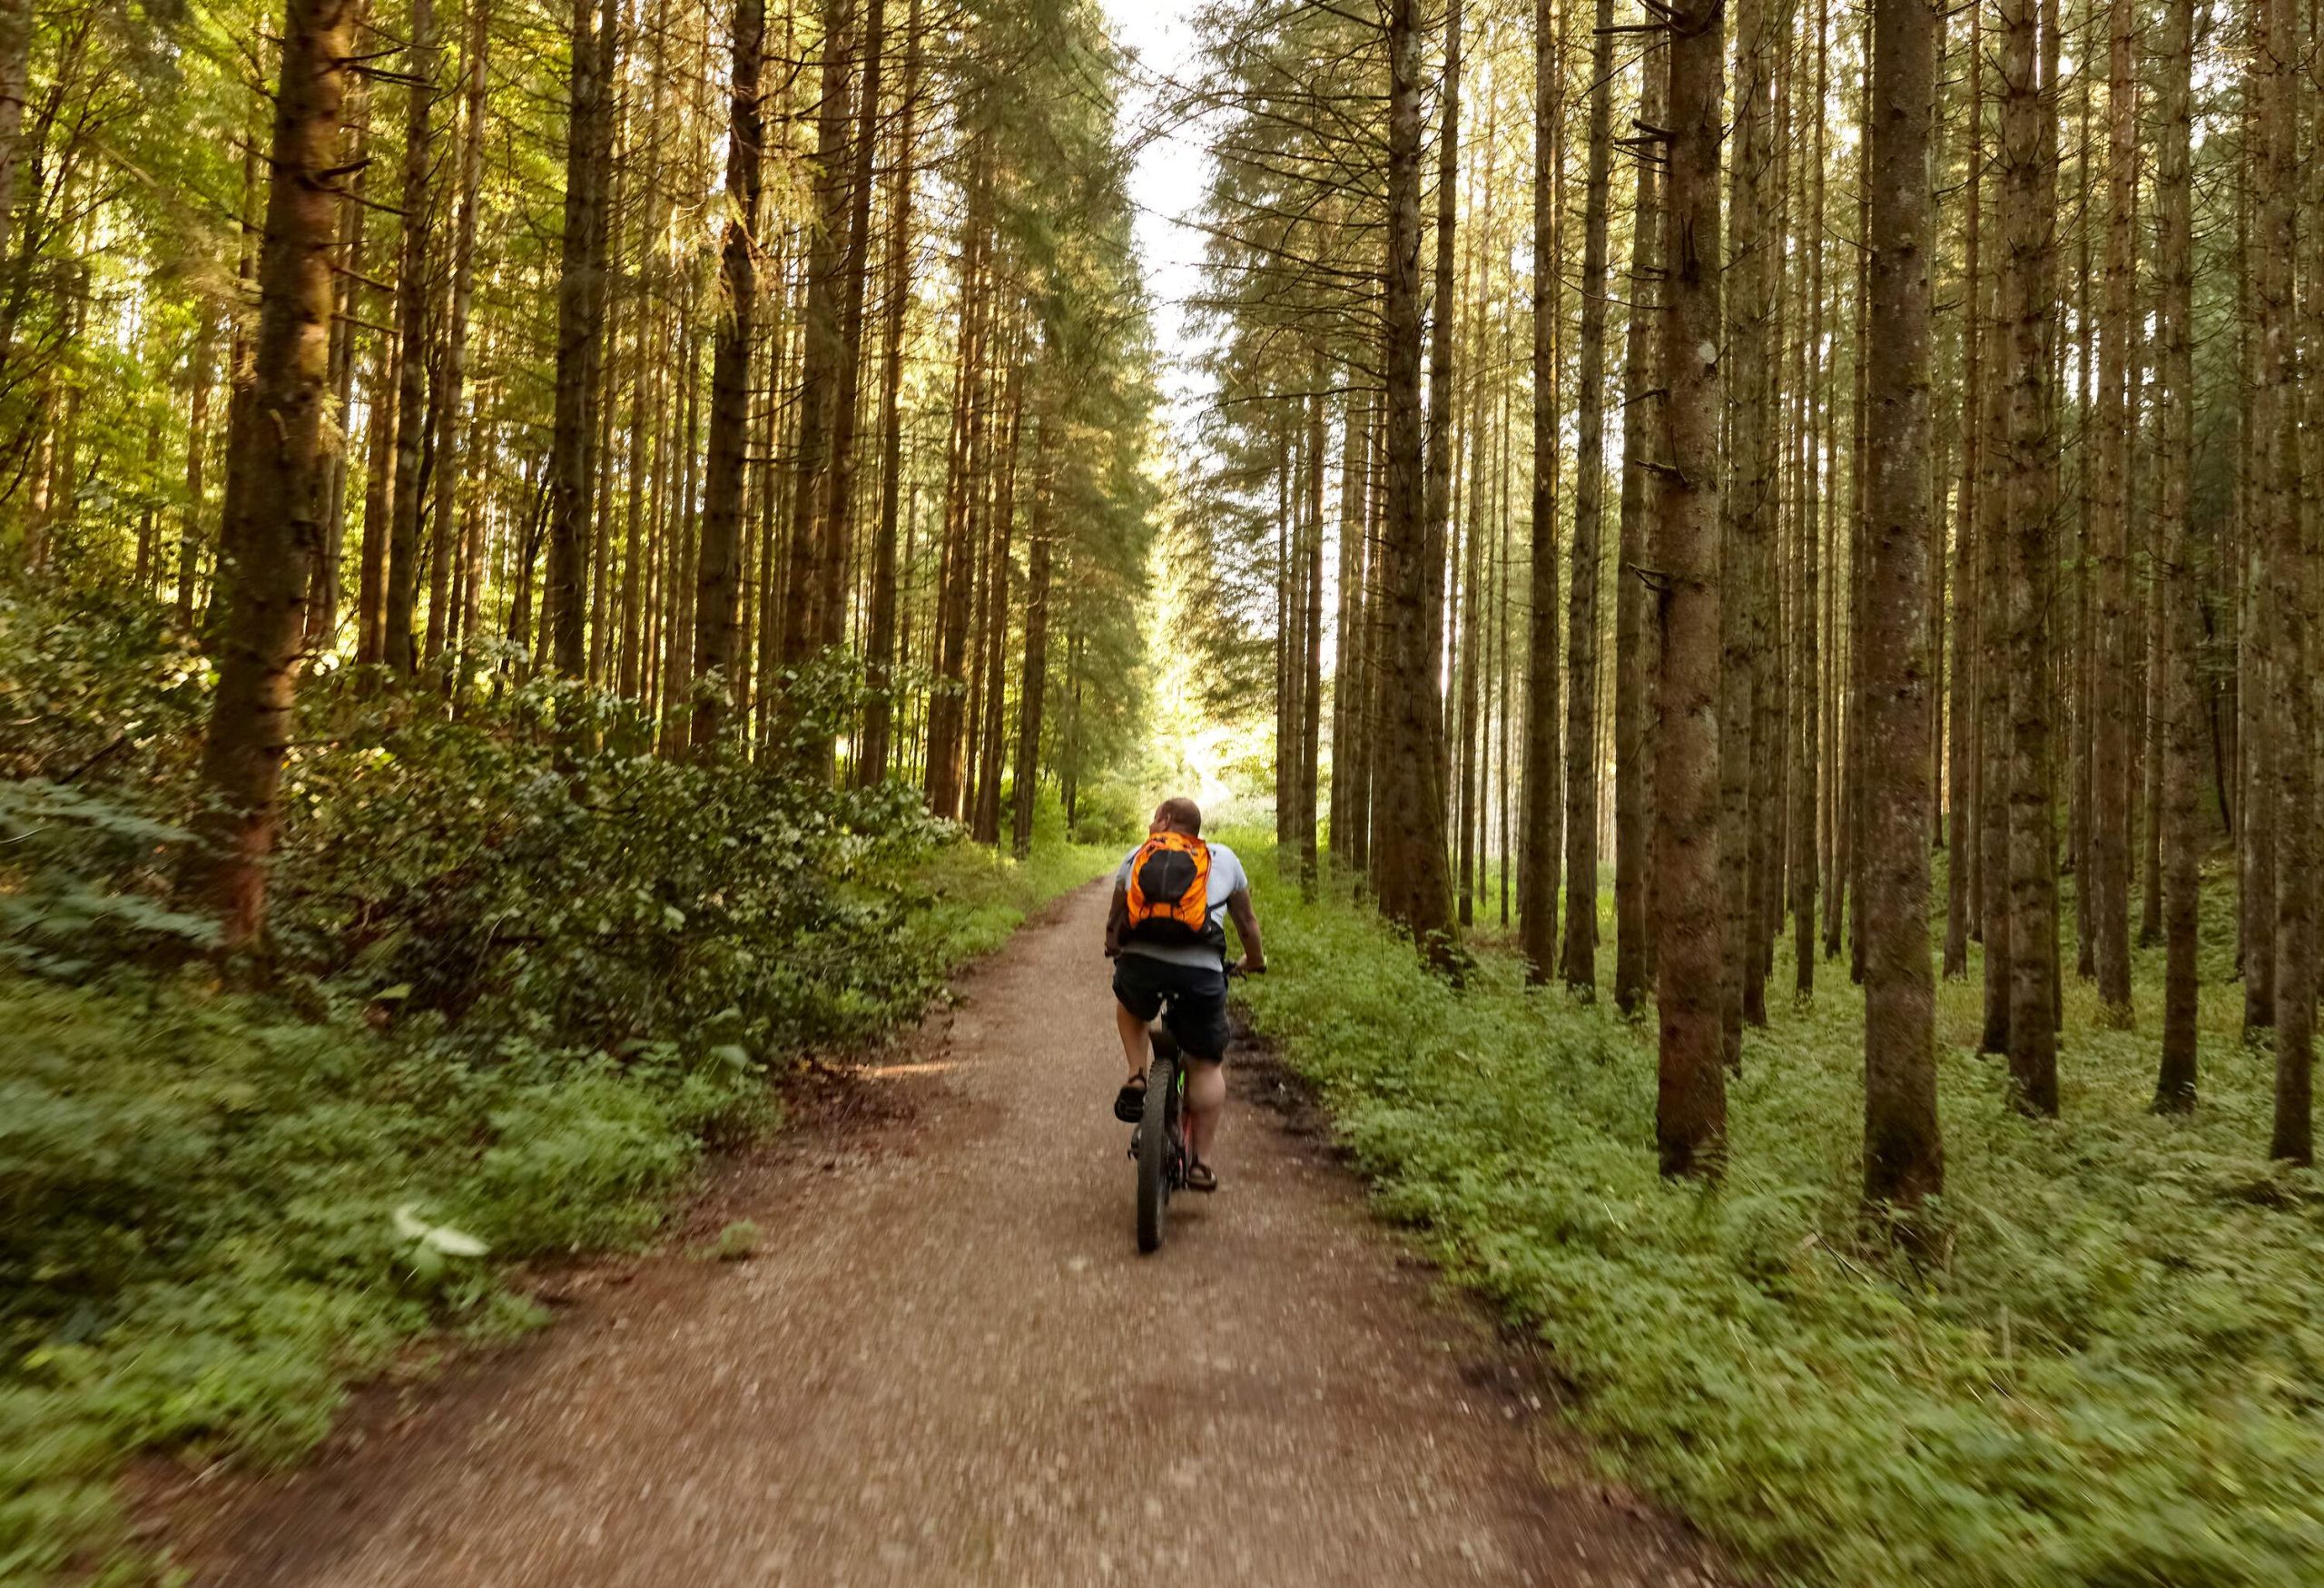 A man bikes on an unpaved pathway in the middle of tall trees in a forest.